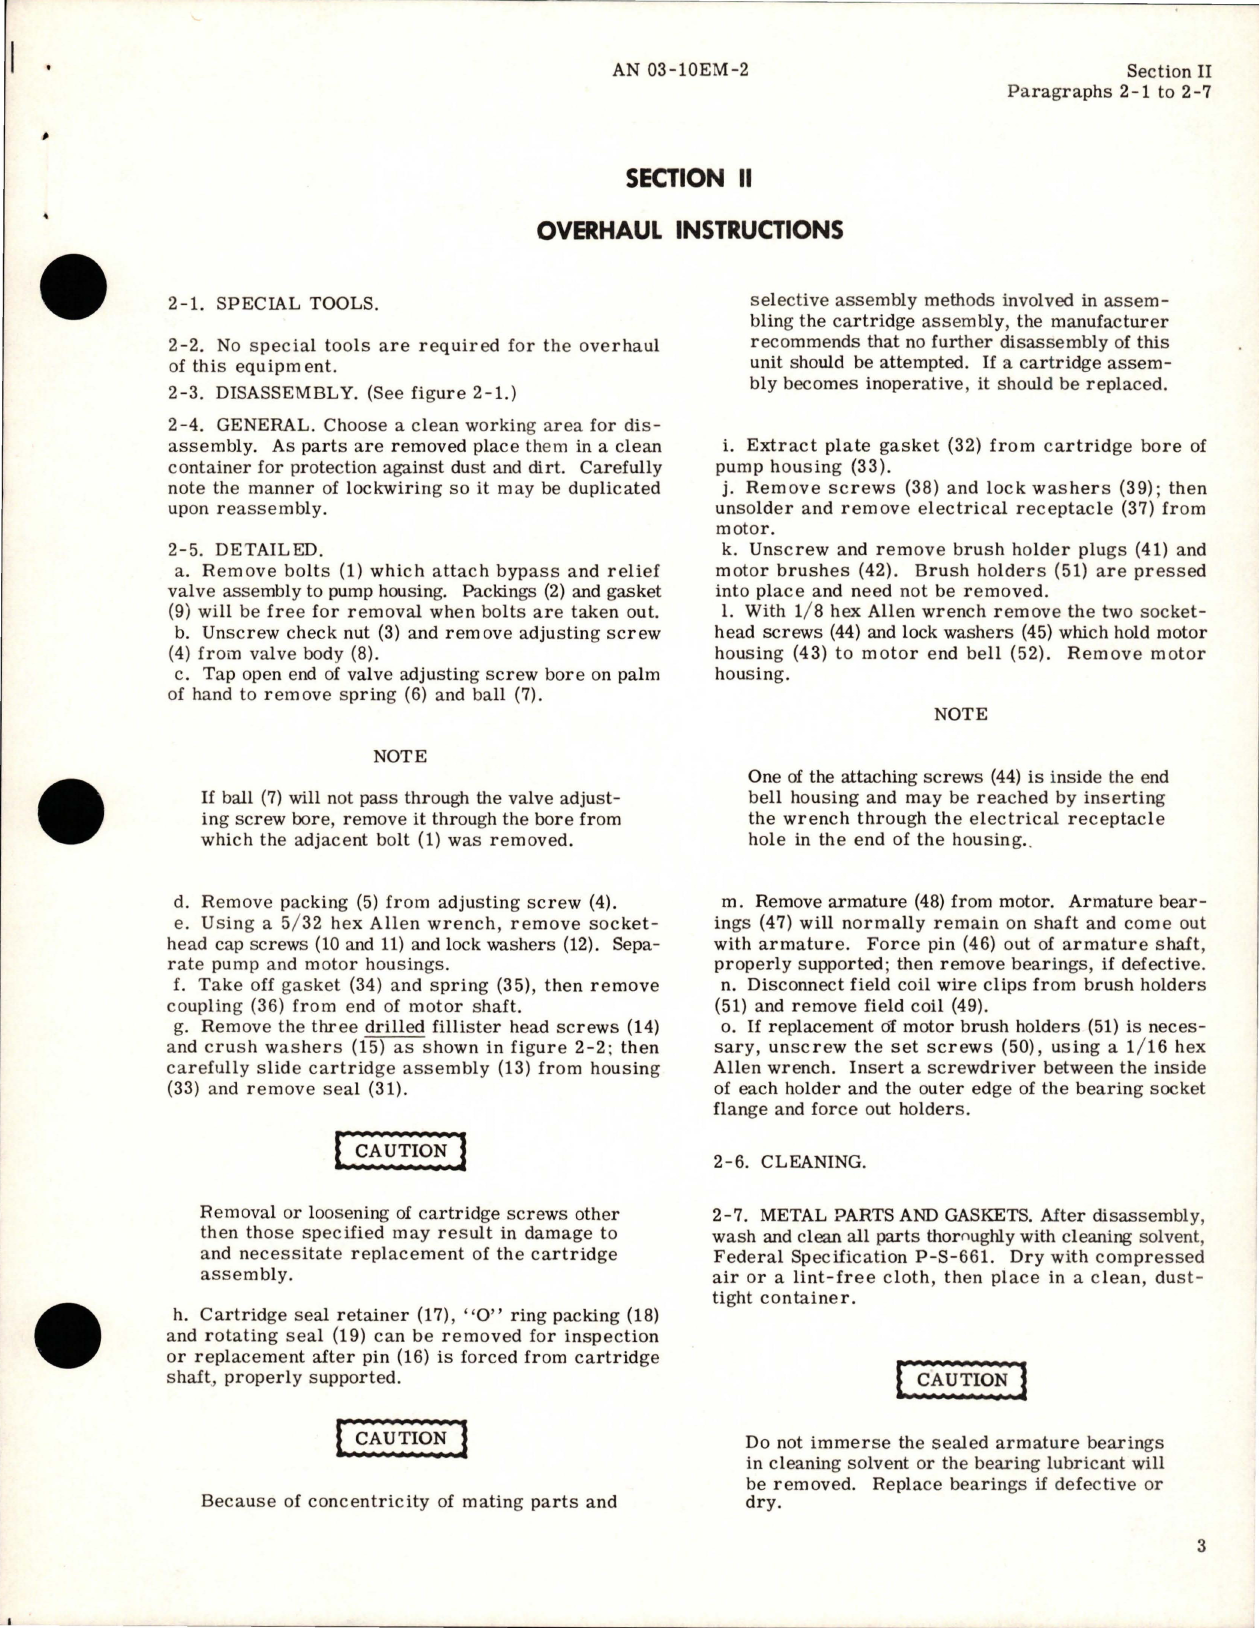 Sample page 5 from AirCorps Library document: Overhaul Instructions for Emergency Fuel Pump - Part 19902 and 20653-2 